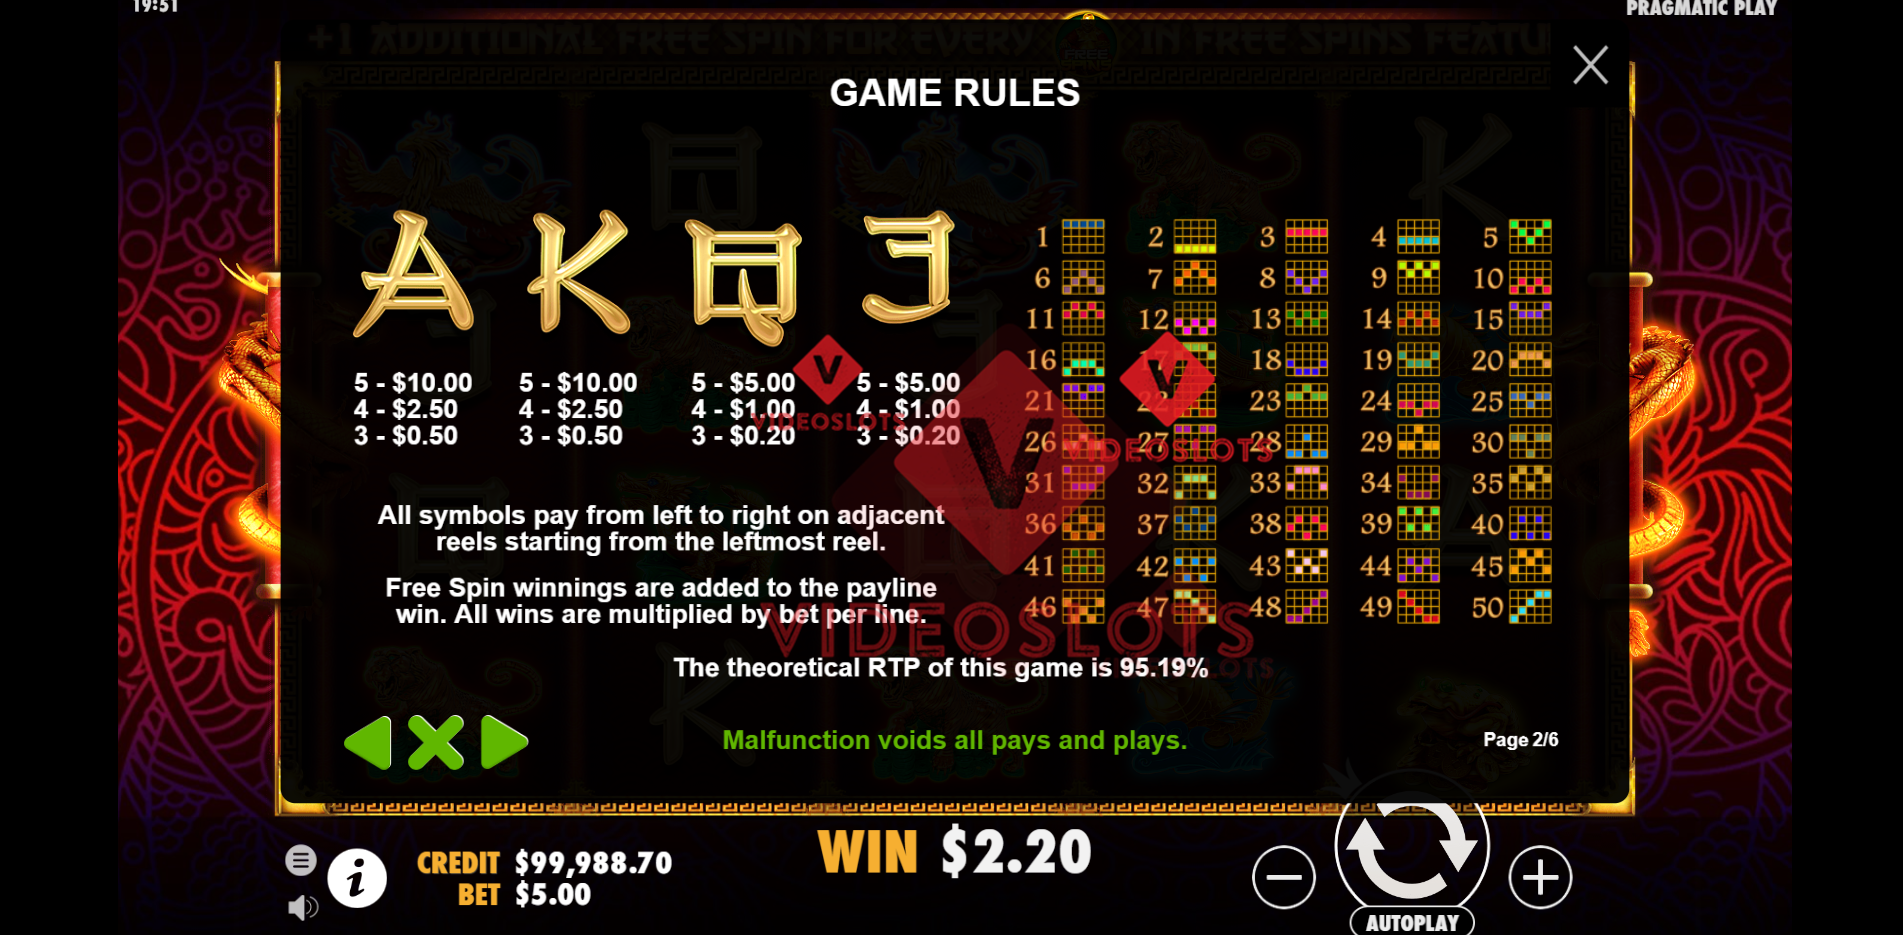 Game Rules for Lucky Dragons slot by Pragmatic Play